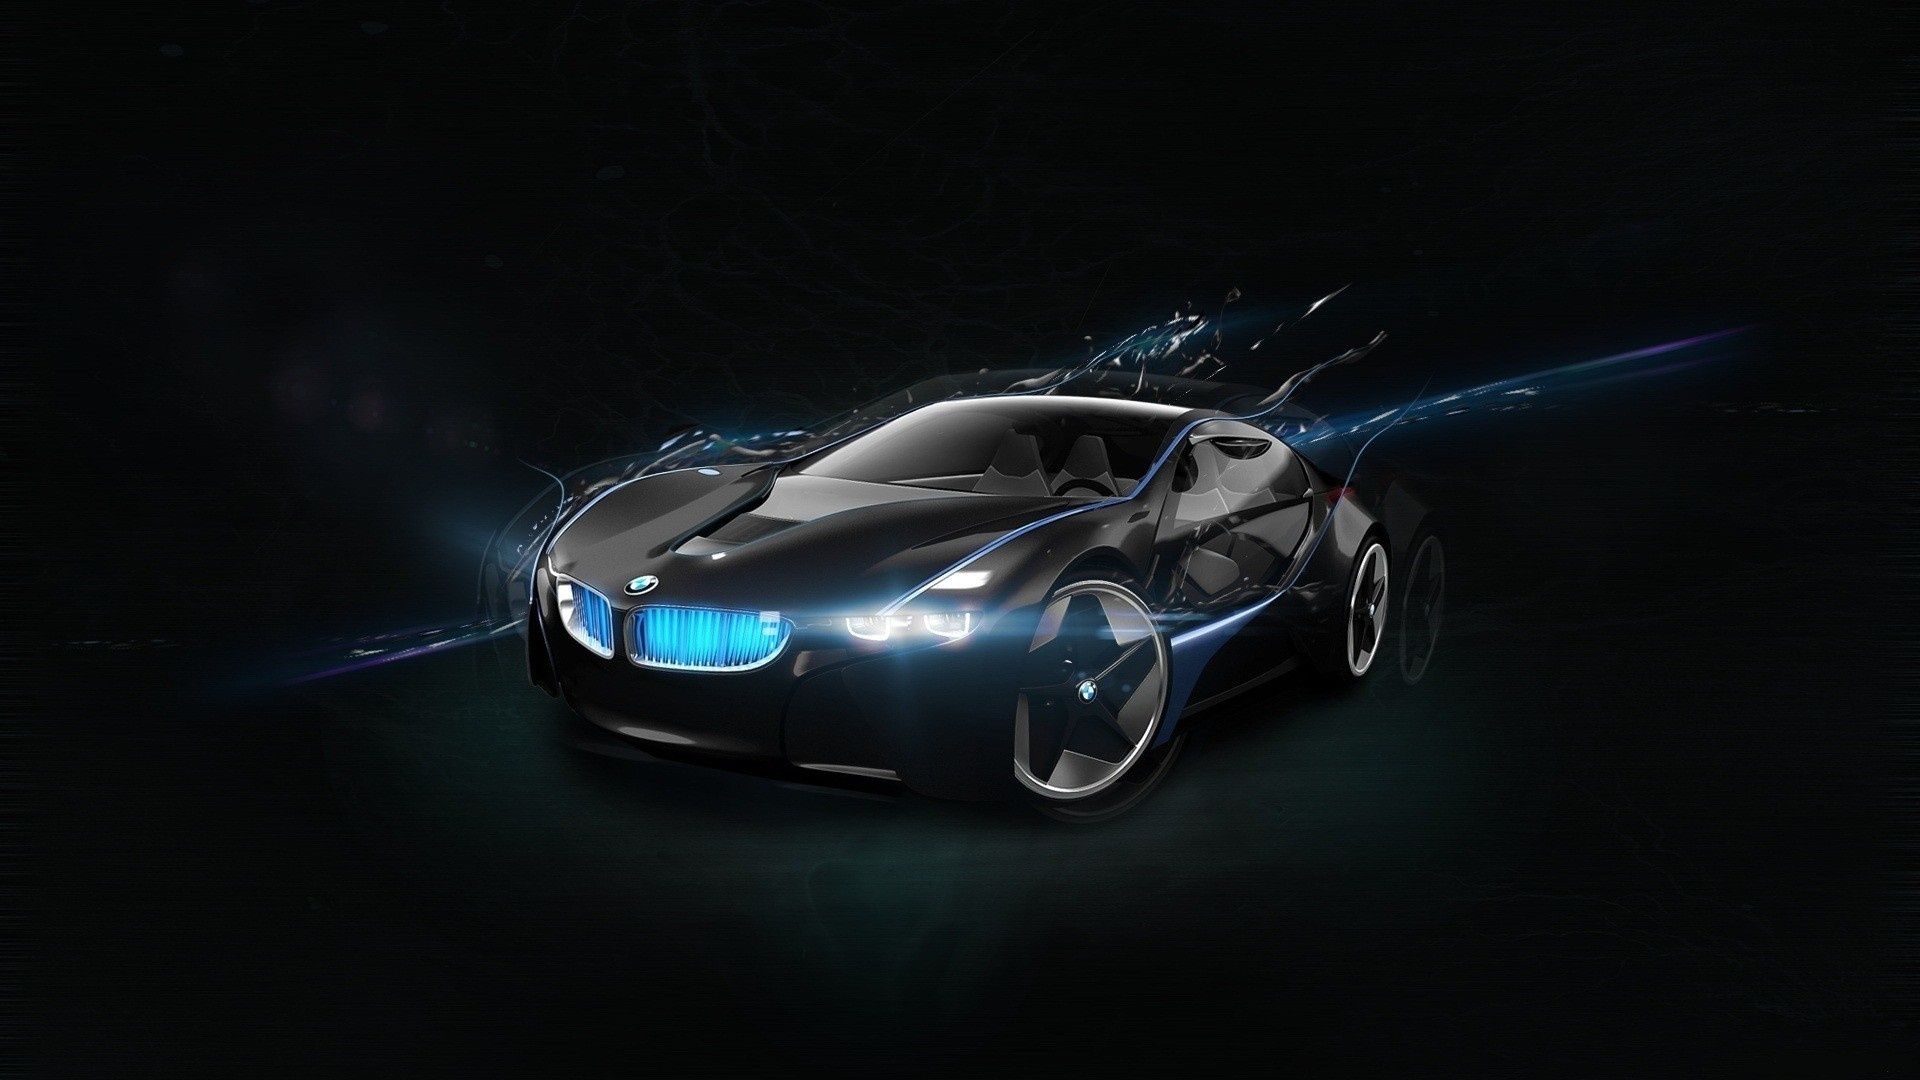 BMW Vision Super Car Wallpapers | HD Wallpapers